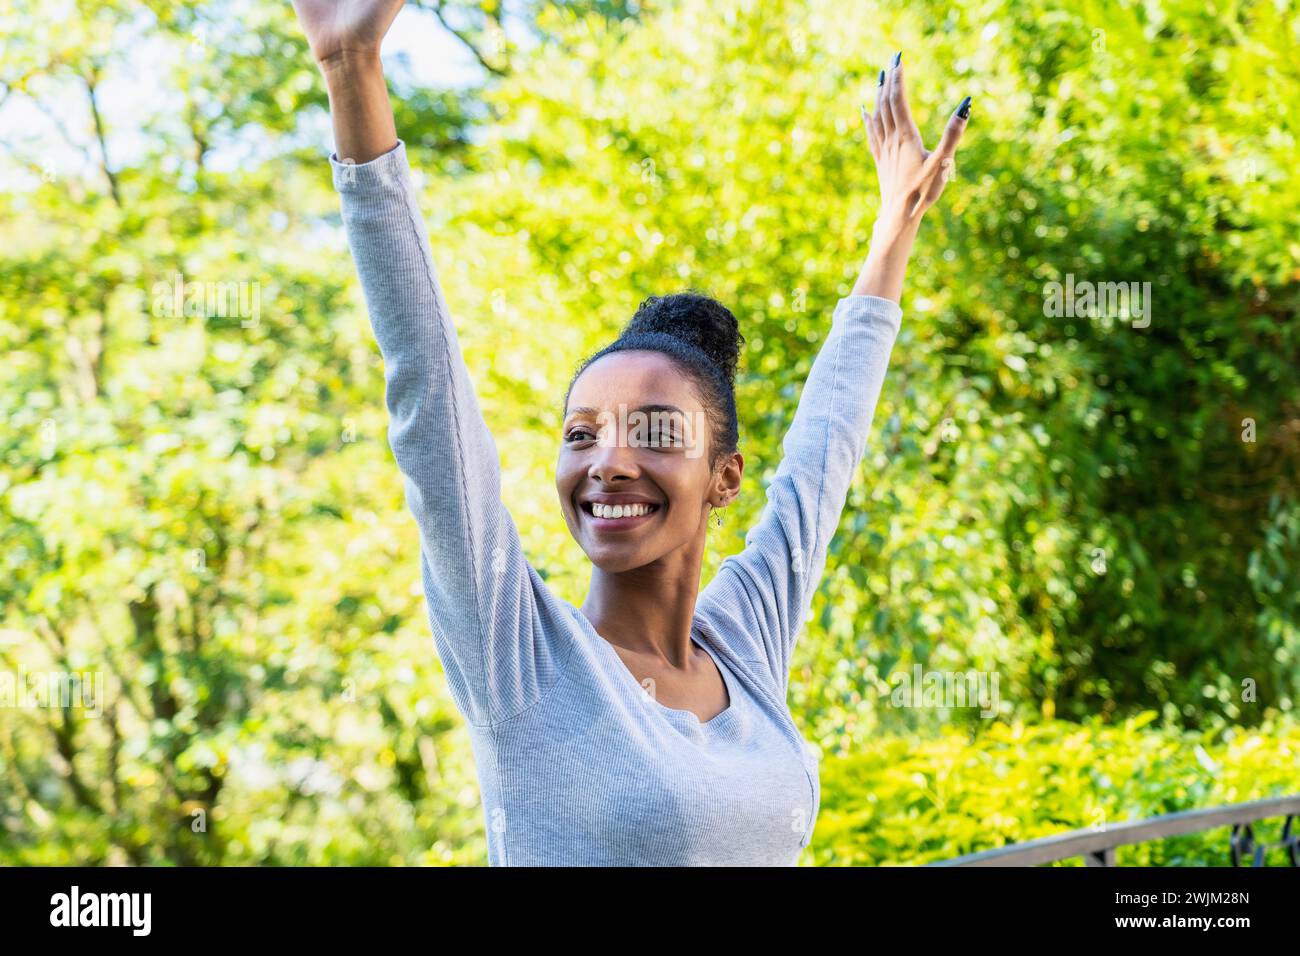 Cheerful young adult woman standing outdoors with arms raised Stock Photo